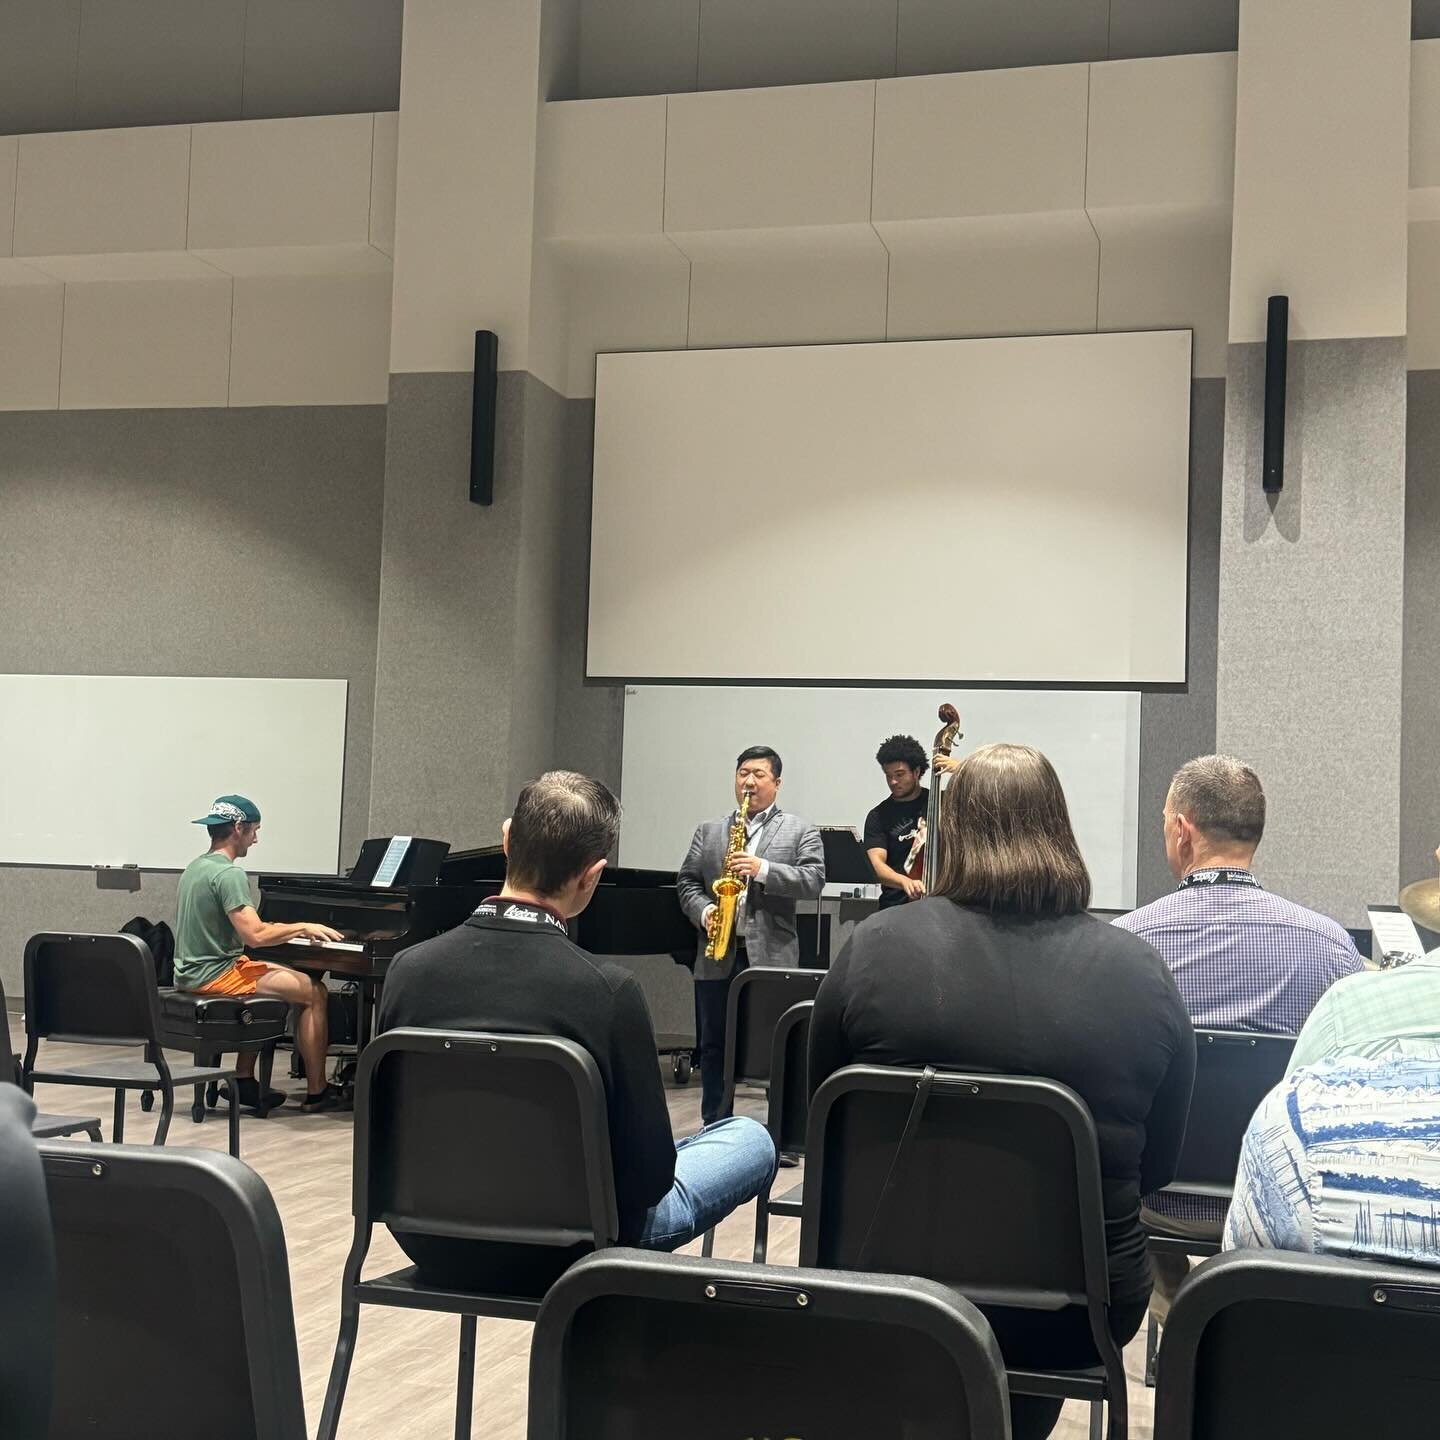 It was great to perform yesterday at the #NASA2024 Biennial Conference and to judge the finals of the jazz competitions with @molsonjazz and @alexgrahamjazz.

I didn&rsquo;t get any video so thanks to @kyle.jon91 for getting this short clip!